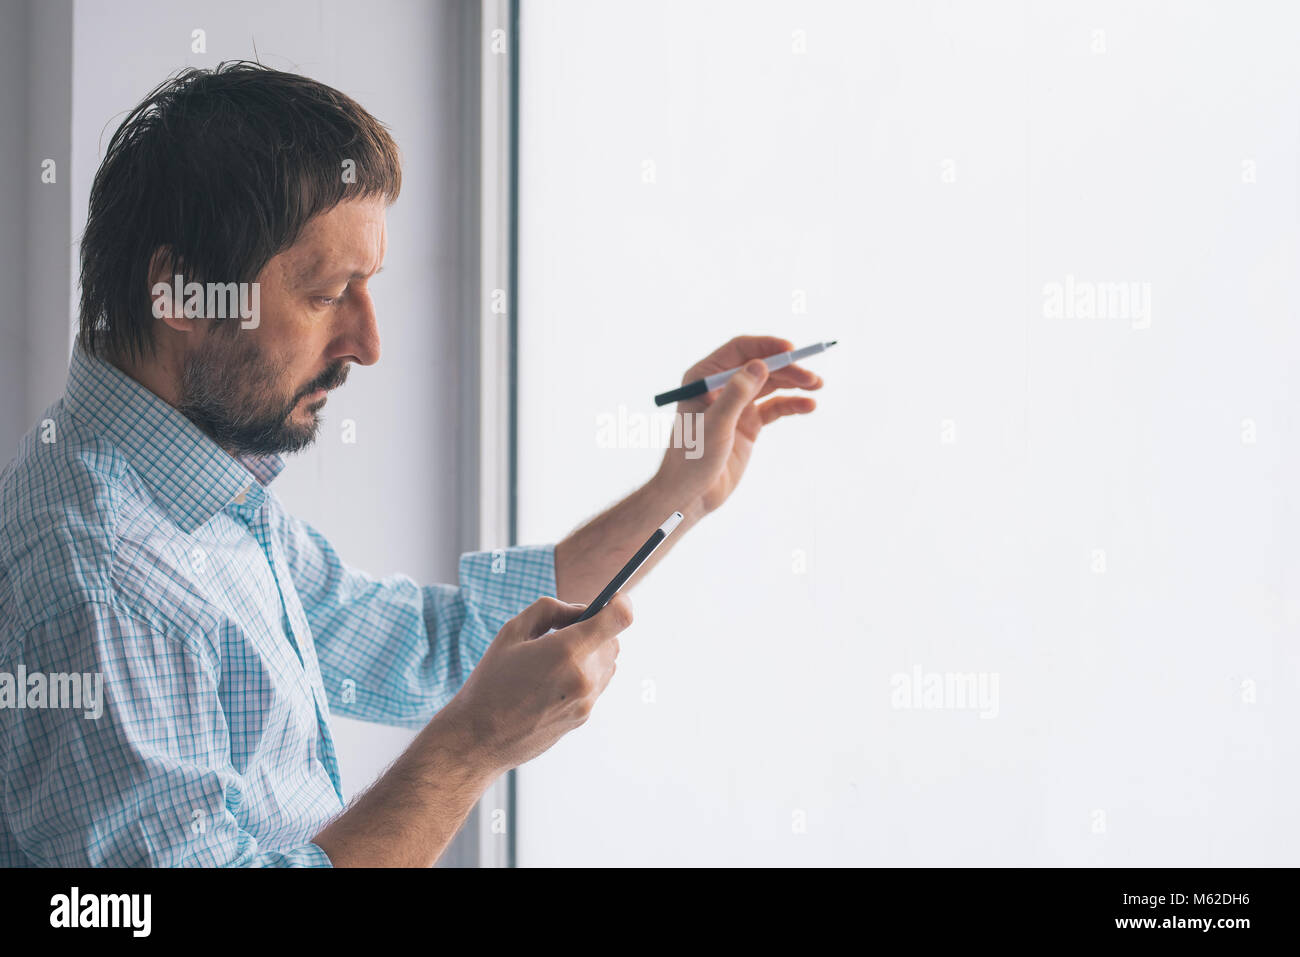 Businessman in office writing on whiteboard with marker felt pen Stock Photo